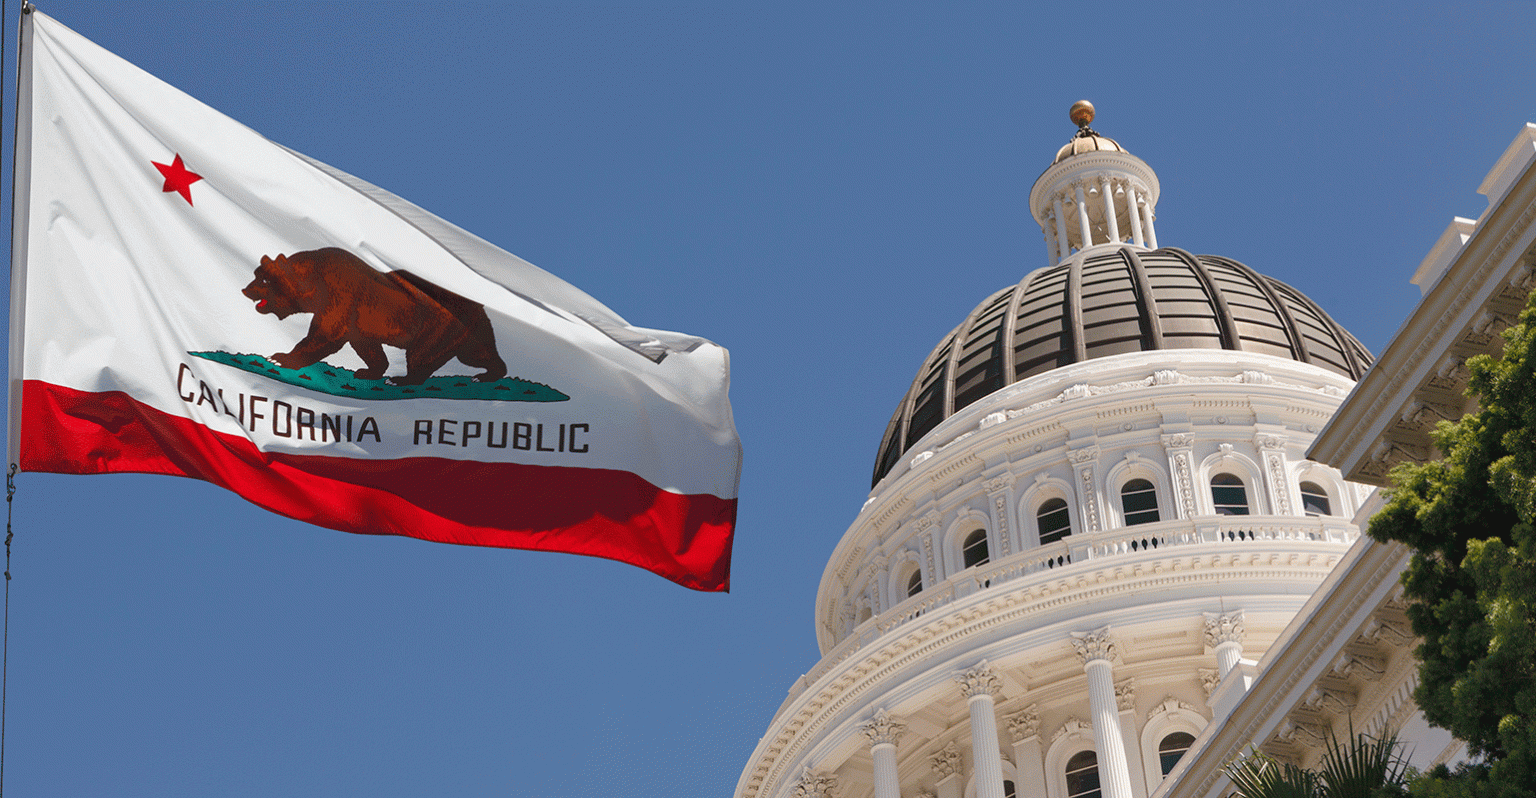 New Laws To Impact California Employees in 2021 Public Employees